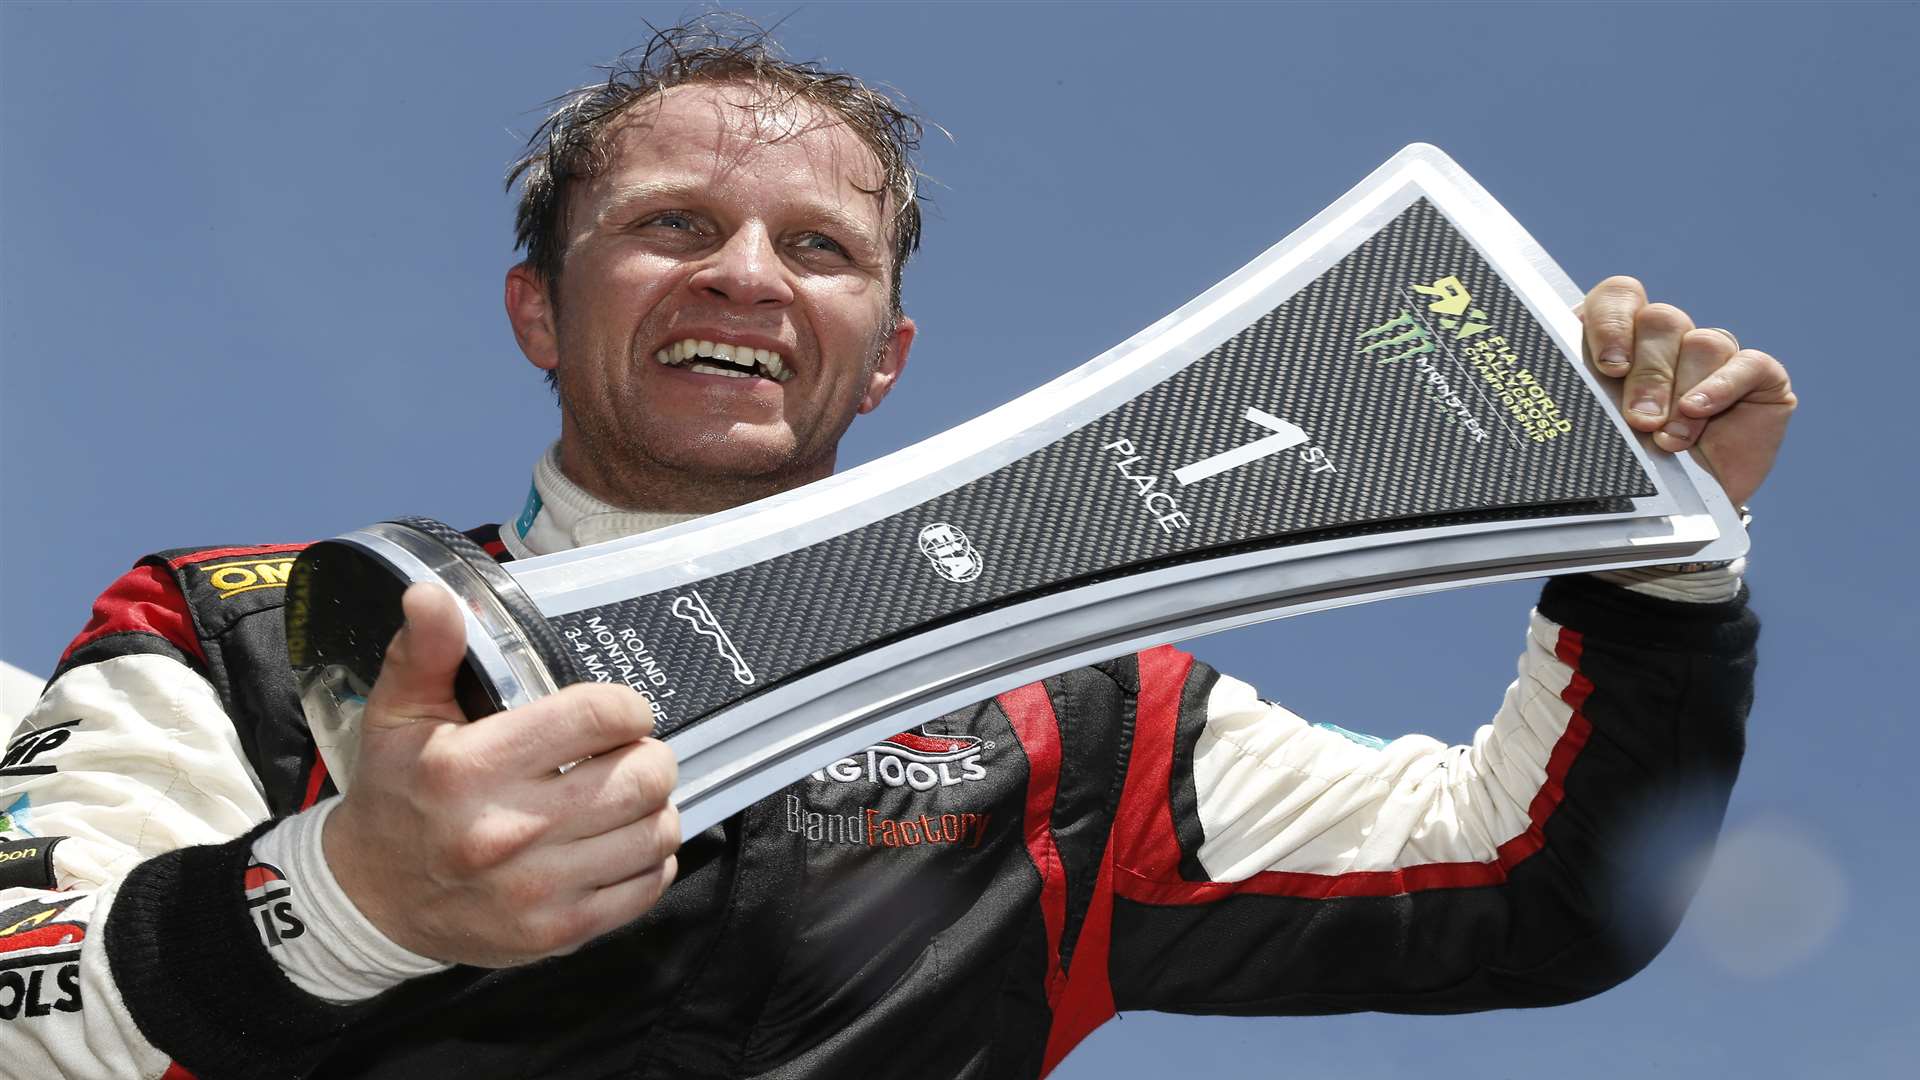 Everyone will be going to beat Petter Solberg, who won round one. Picture - Lydden Hill Press Office